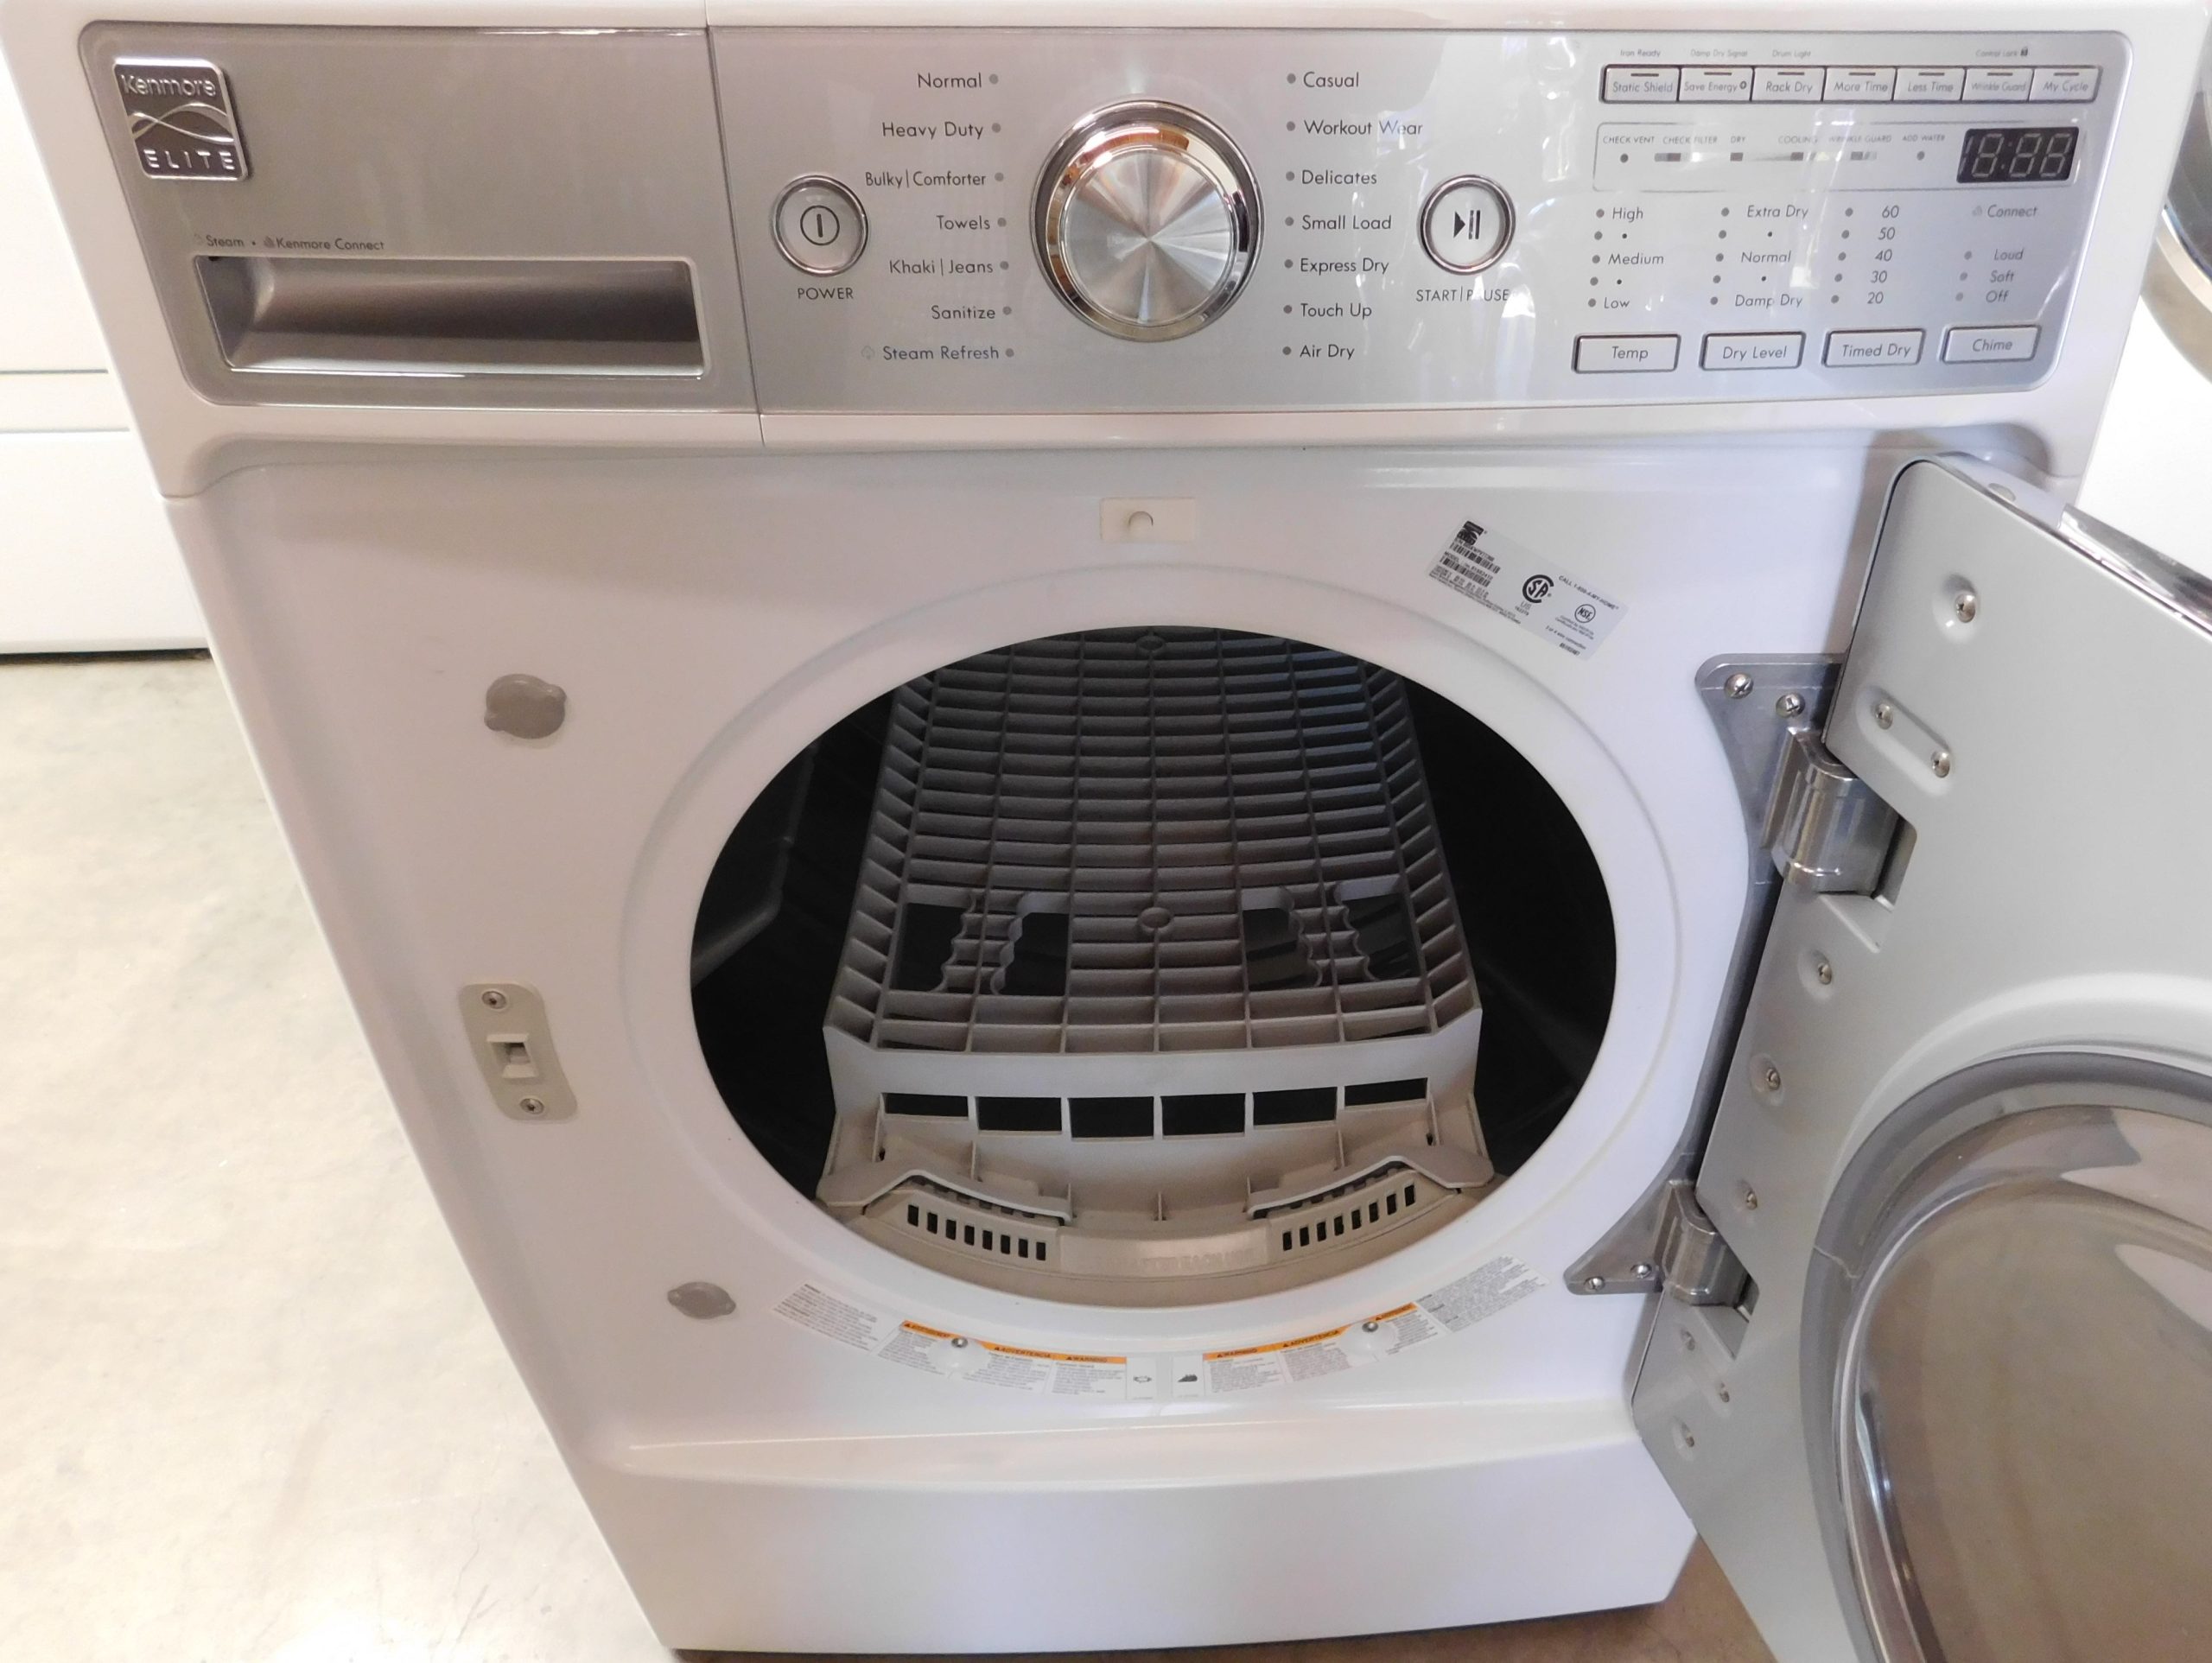 FRONT LOAD- KENMORE WASHER ON STAND - A-114 (FRONT LOAD)